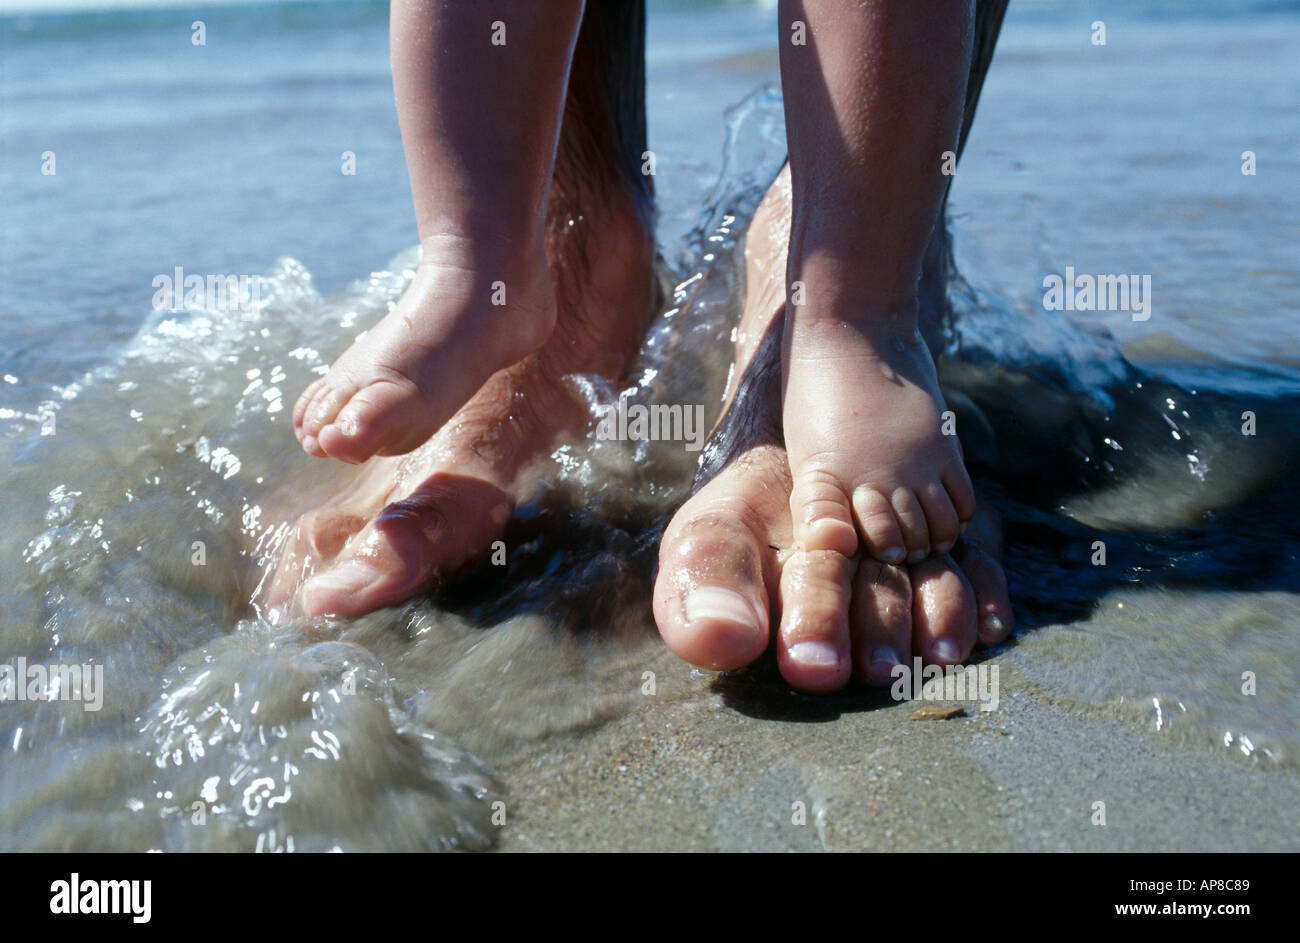 Feet of father and child at beach close-up Stock Photo